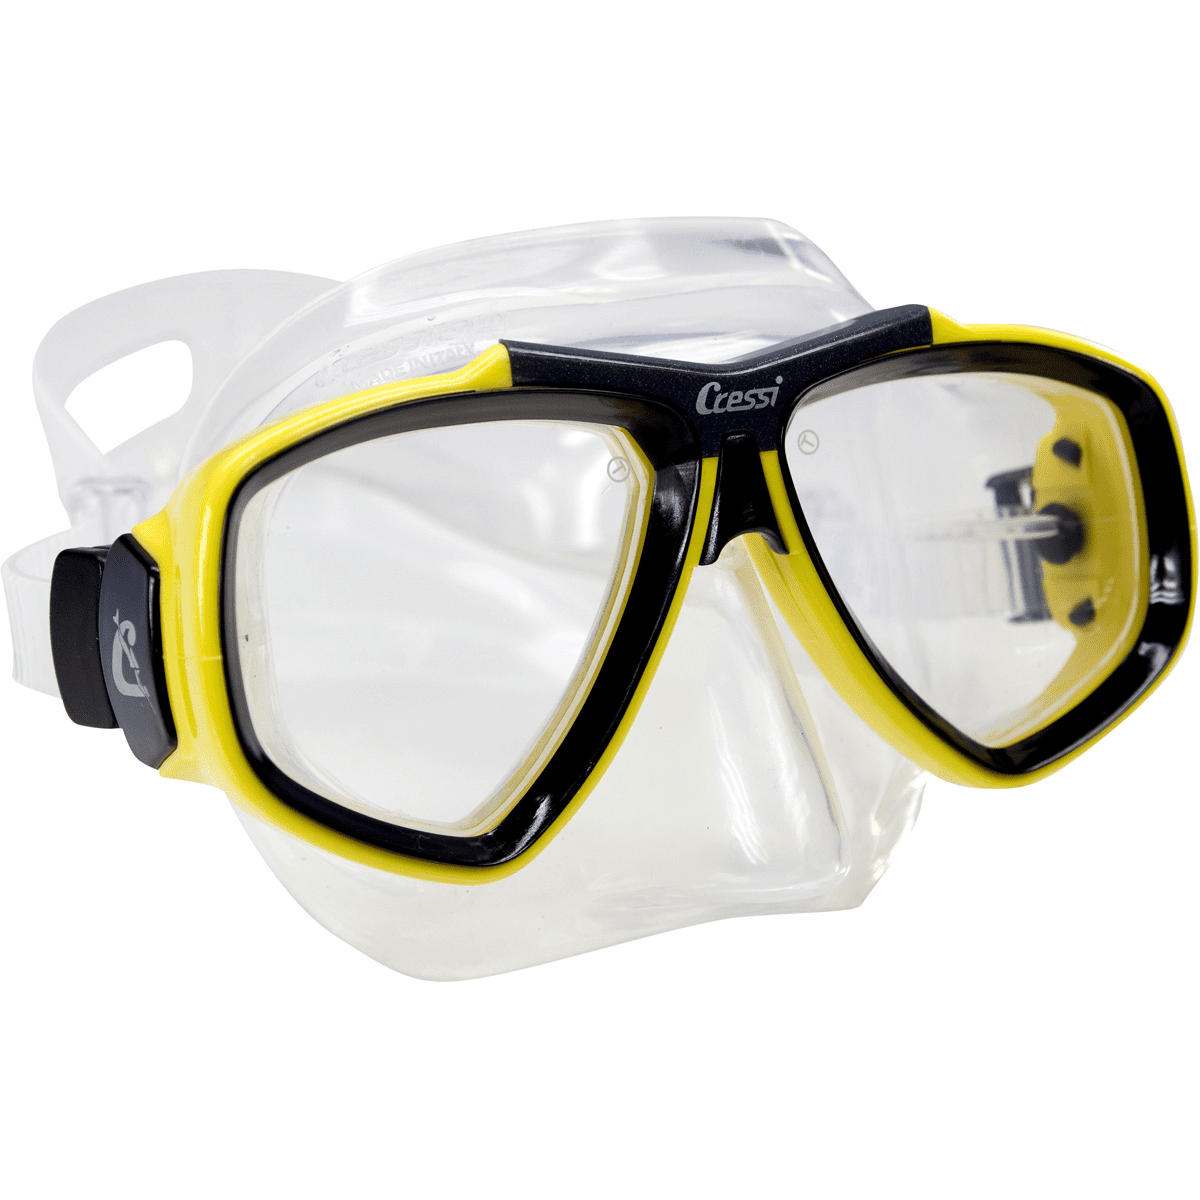 Cressi Focus Mask for Scuba and Snorkeling